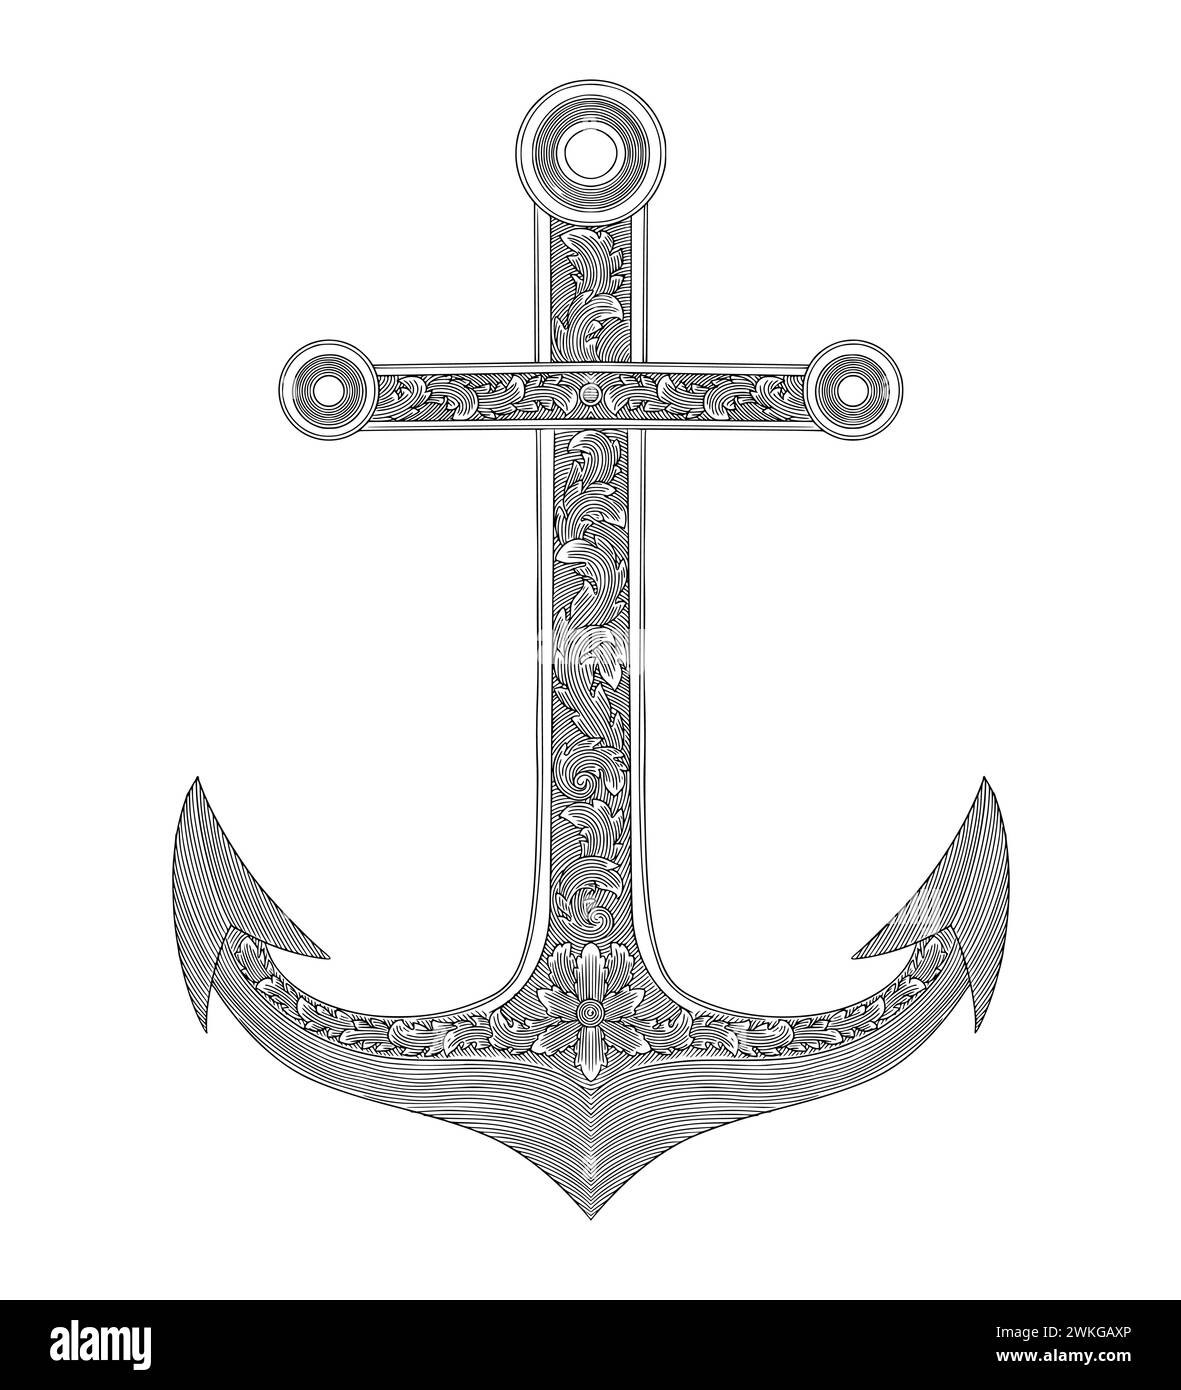 Ship anchor with leaf ornament vintage engraving drawing illustration Stock Vector